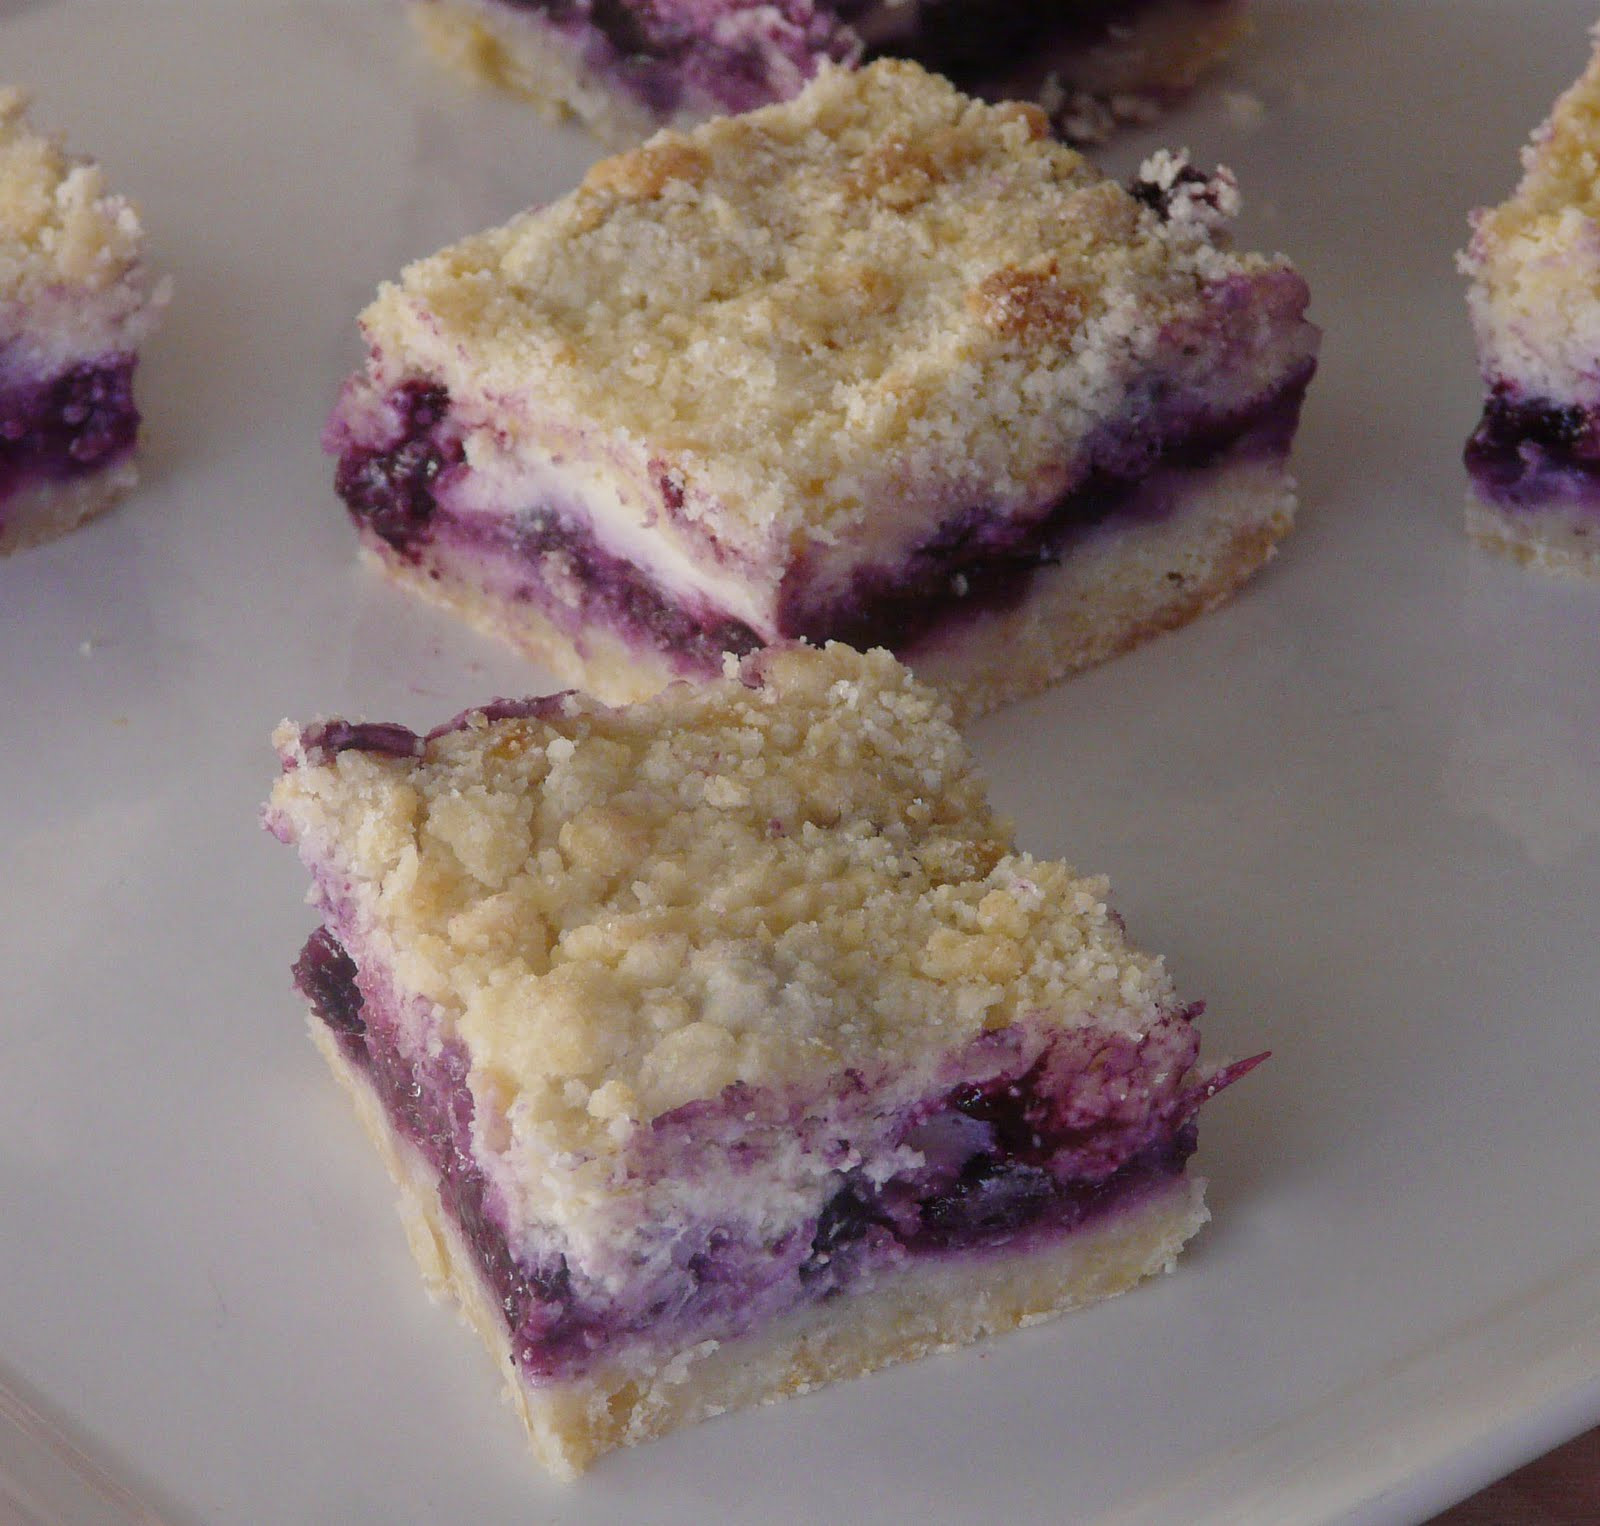 Blueberry Dessert Recipes With Cream Cheese
 Thibeault s Table Blueberry Cream Cheese Crumb Bars